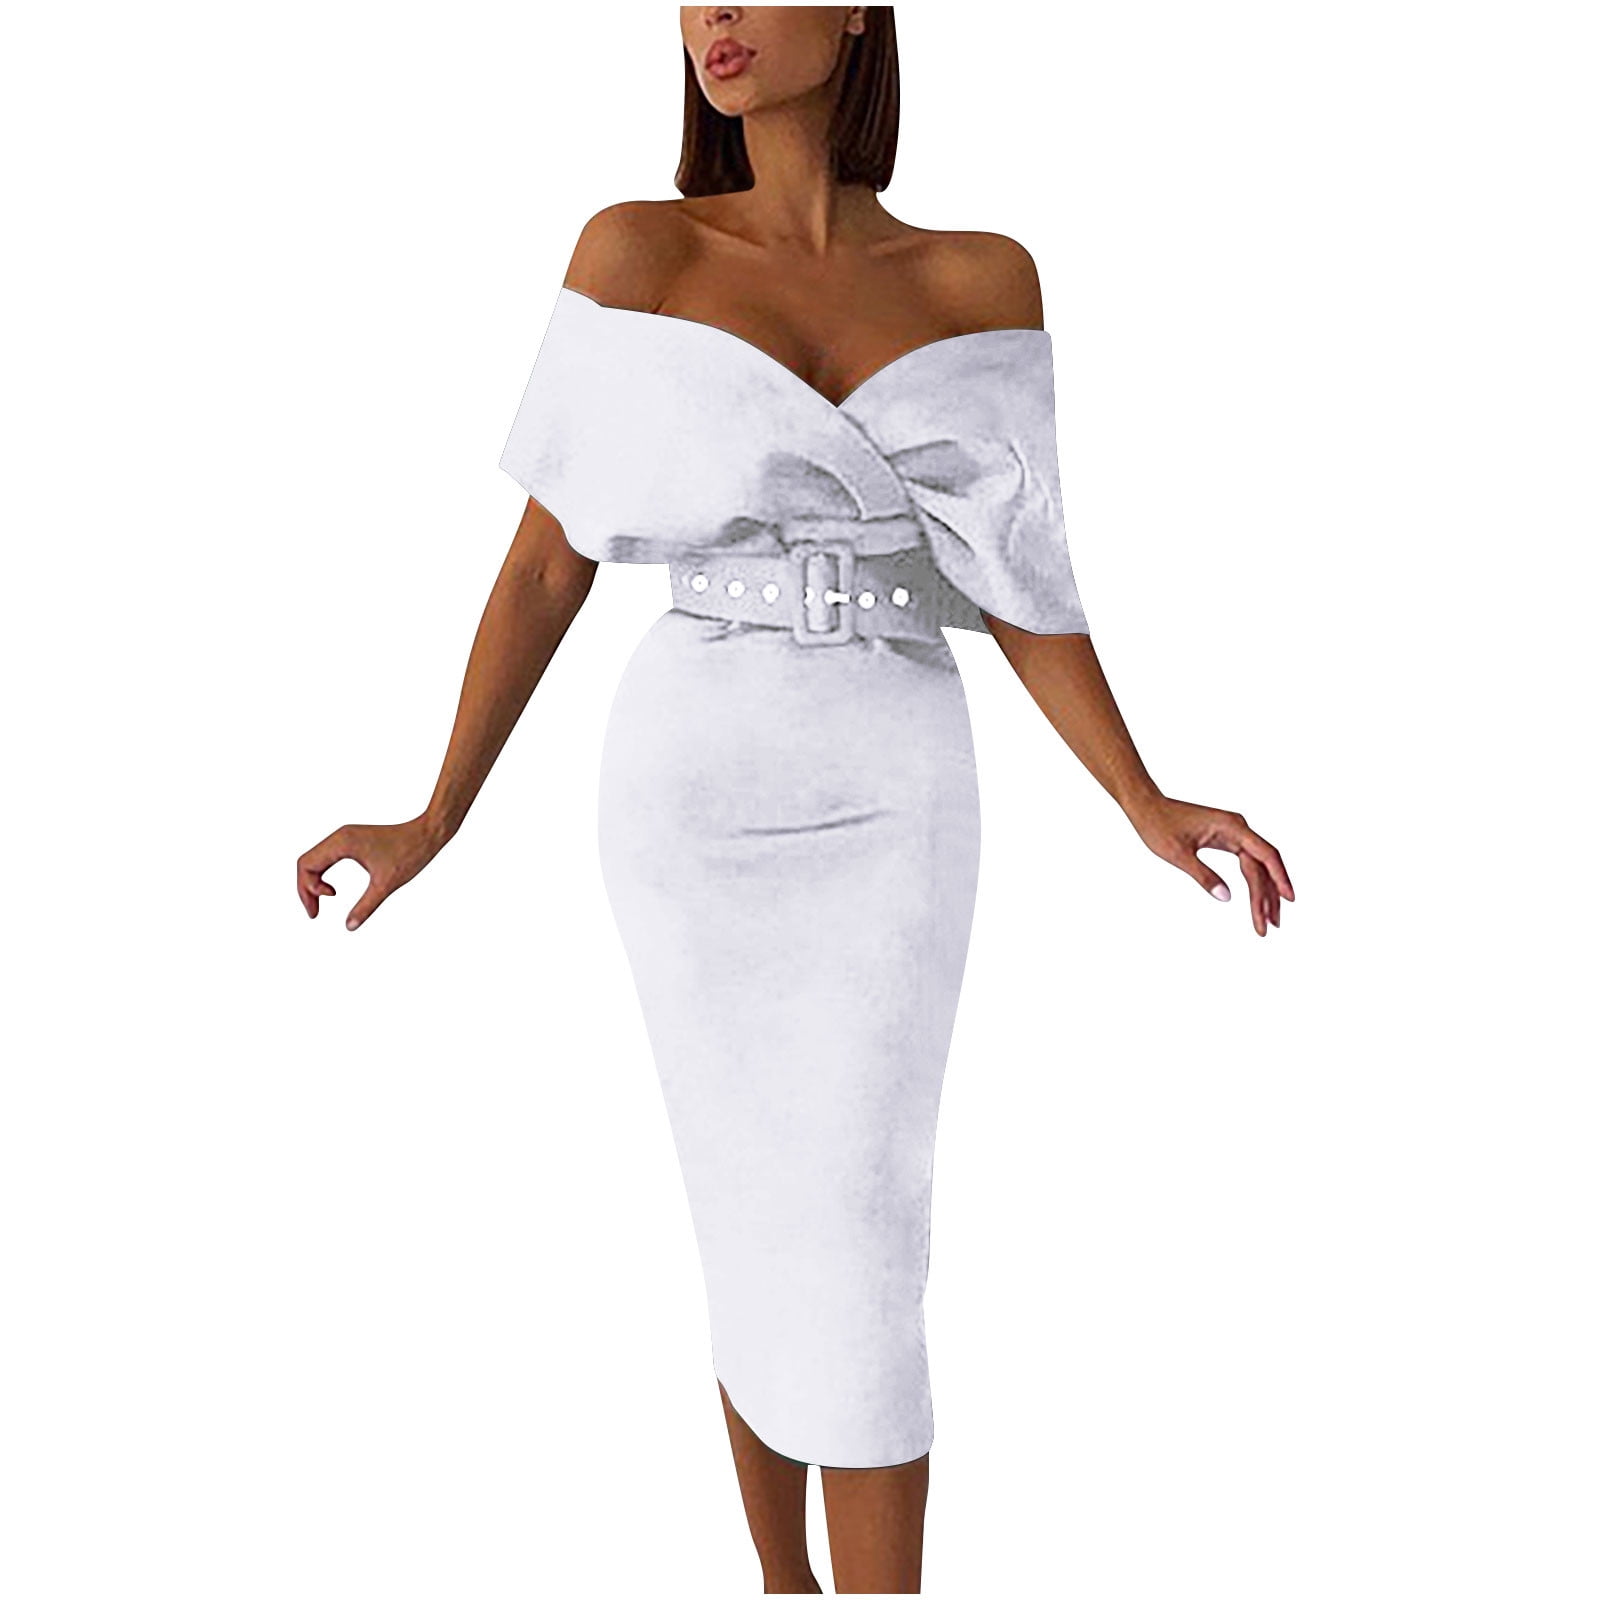 Shop Trendy Special Occasion Dresses Now! - The Dress Outlet